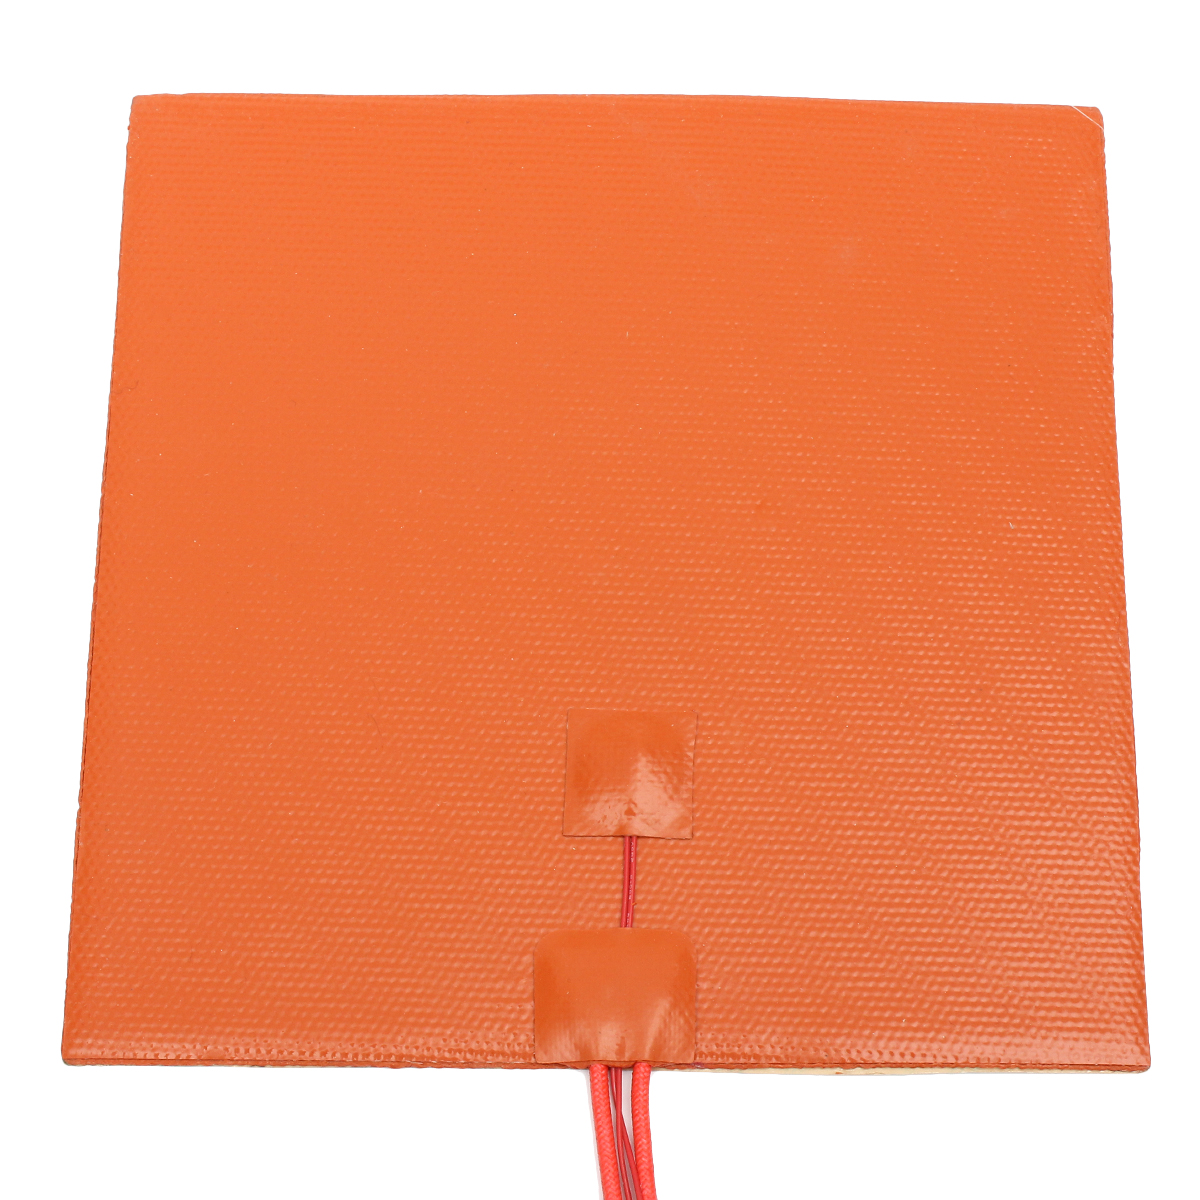 12V 200W 200mmx200mm Waterproof Flexible Silicone Heating Pad Heater For 3d Printer Heat Bed 8